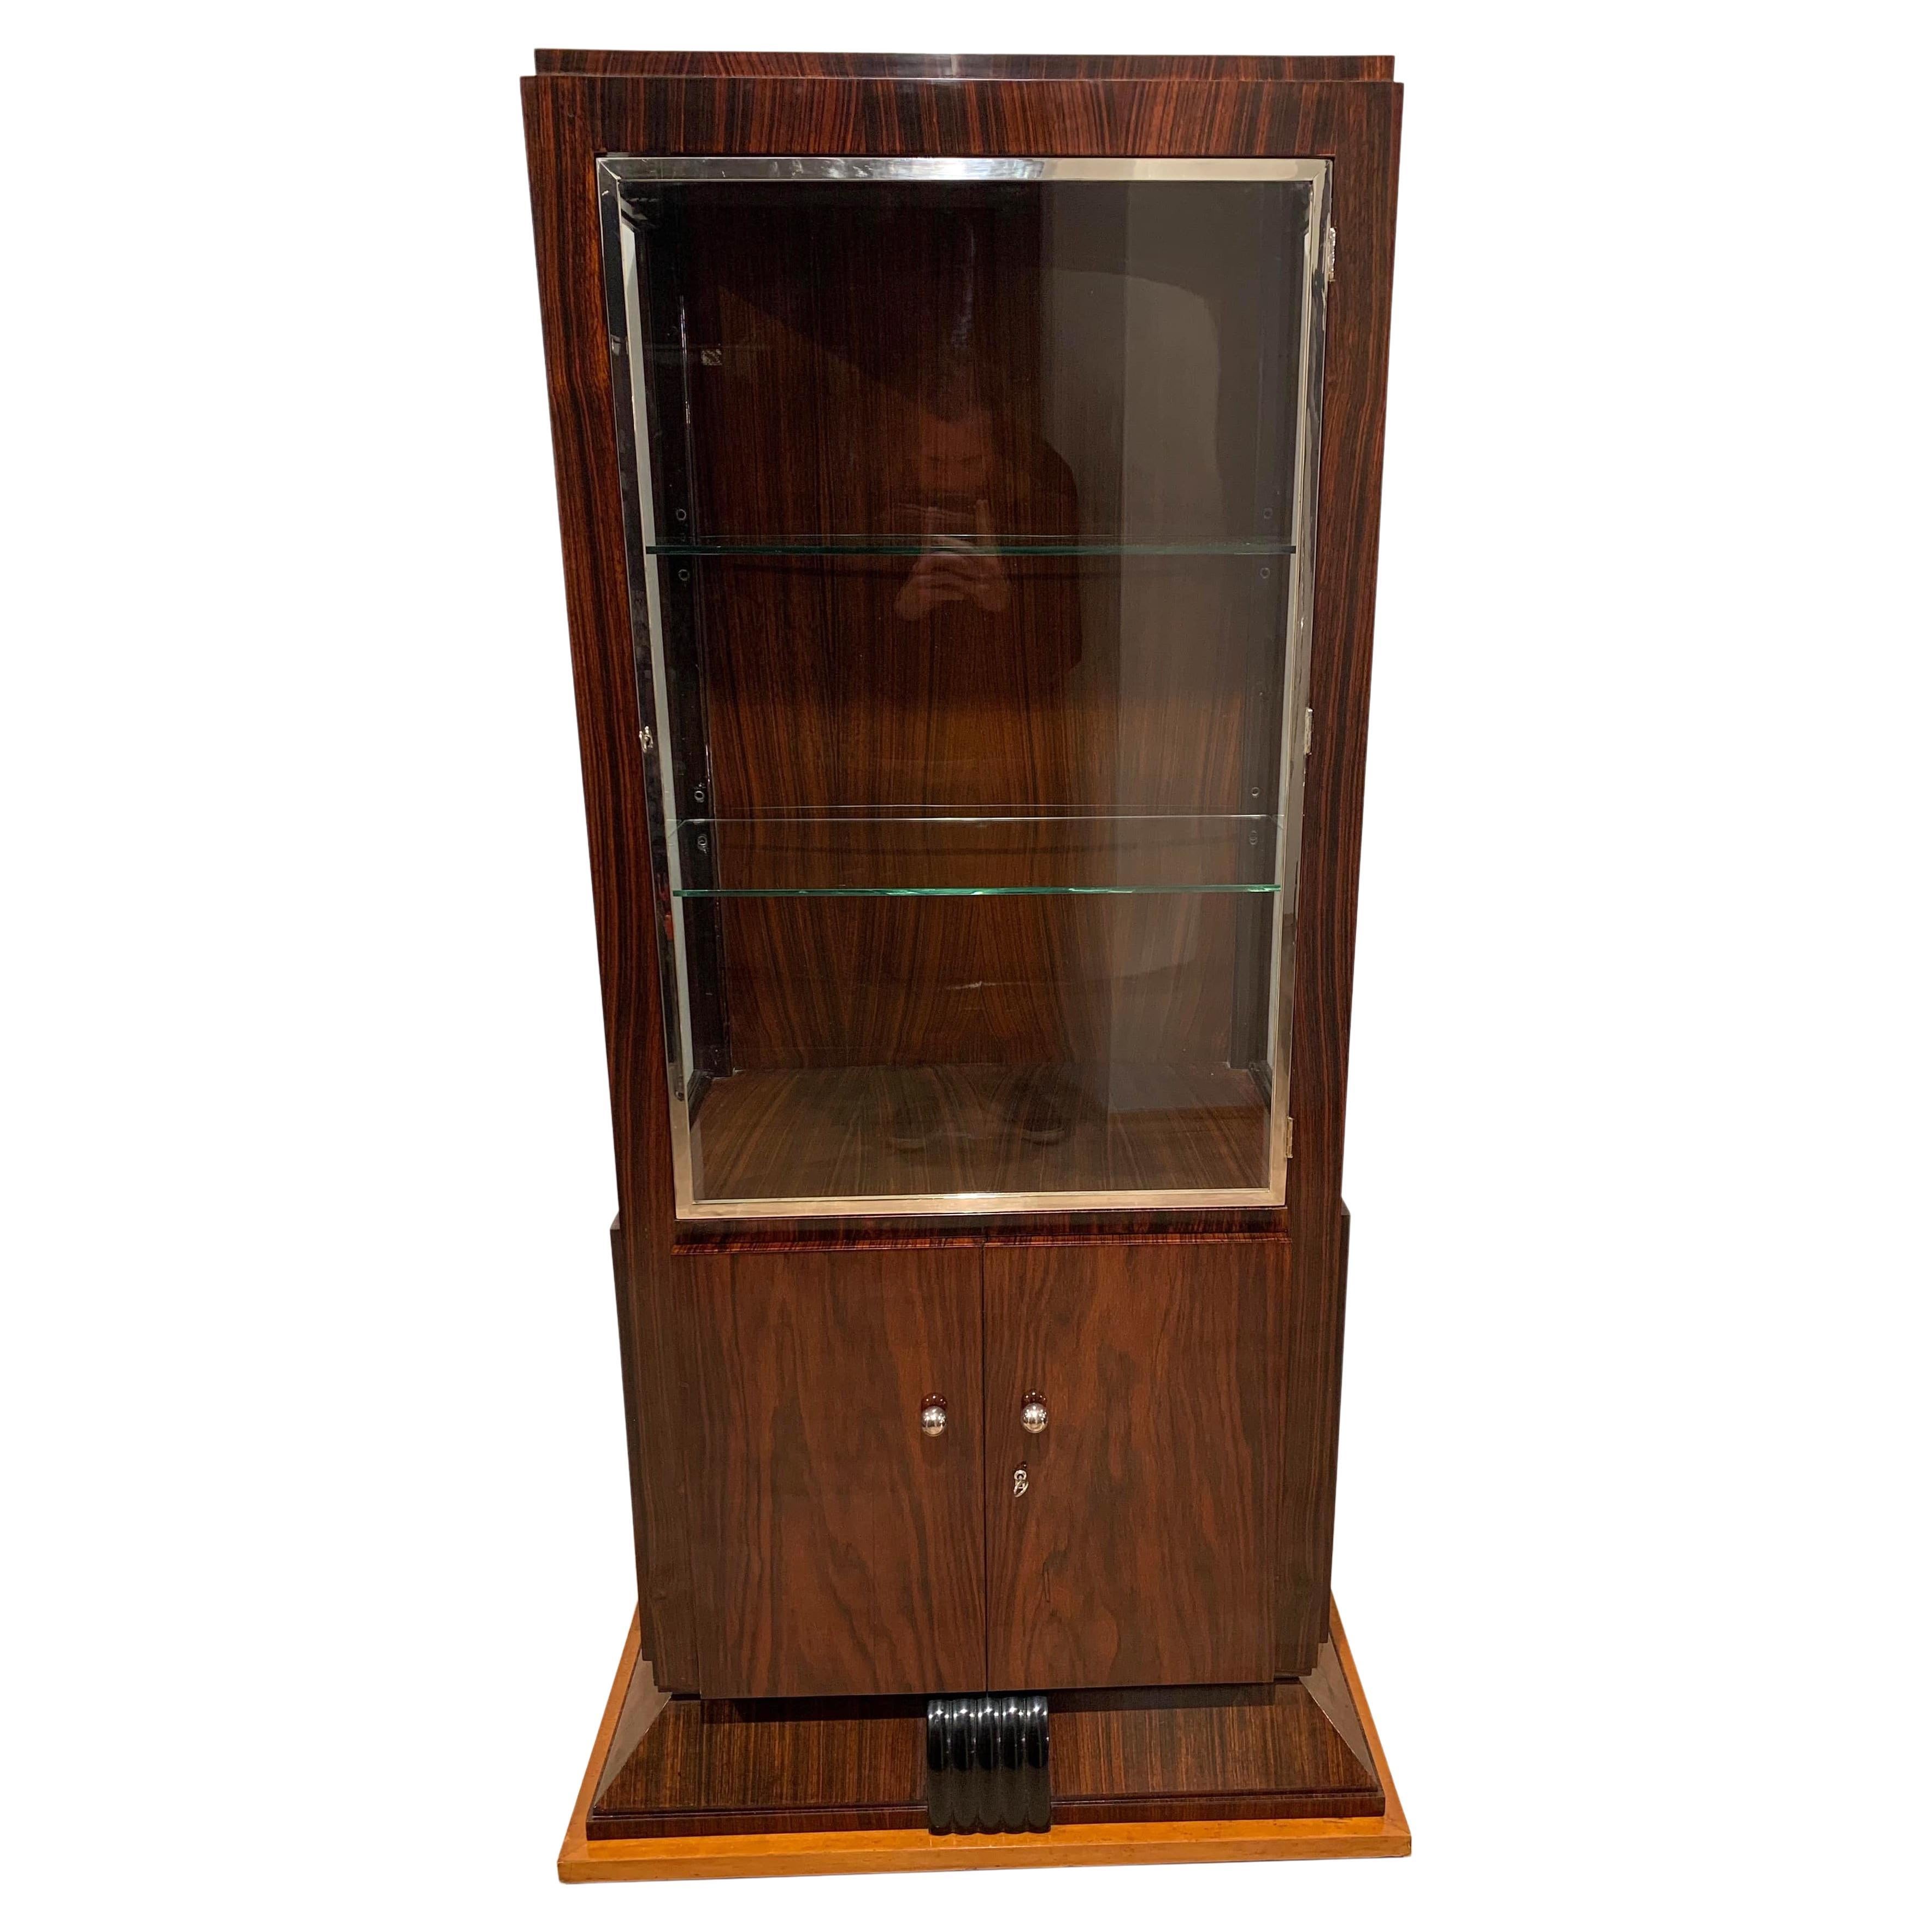 Elegant straight-lined, Art Deco period Vitrine or Showcase with three sides glass from France about 1925.

Rosewood / Palisander veneered on the in- and outside. 
Base in maple solid wood. 
Top with one door and original chromed metal frame. Bottom